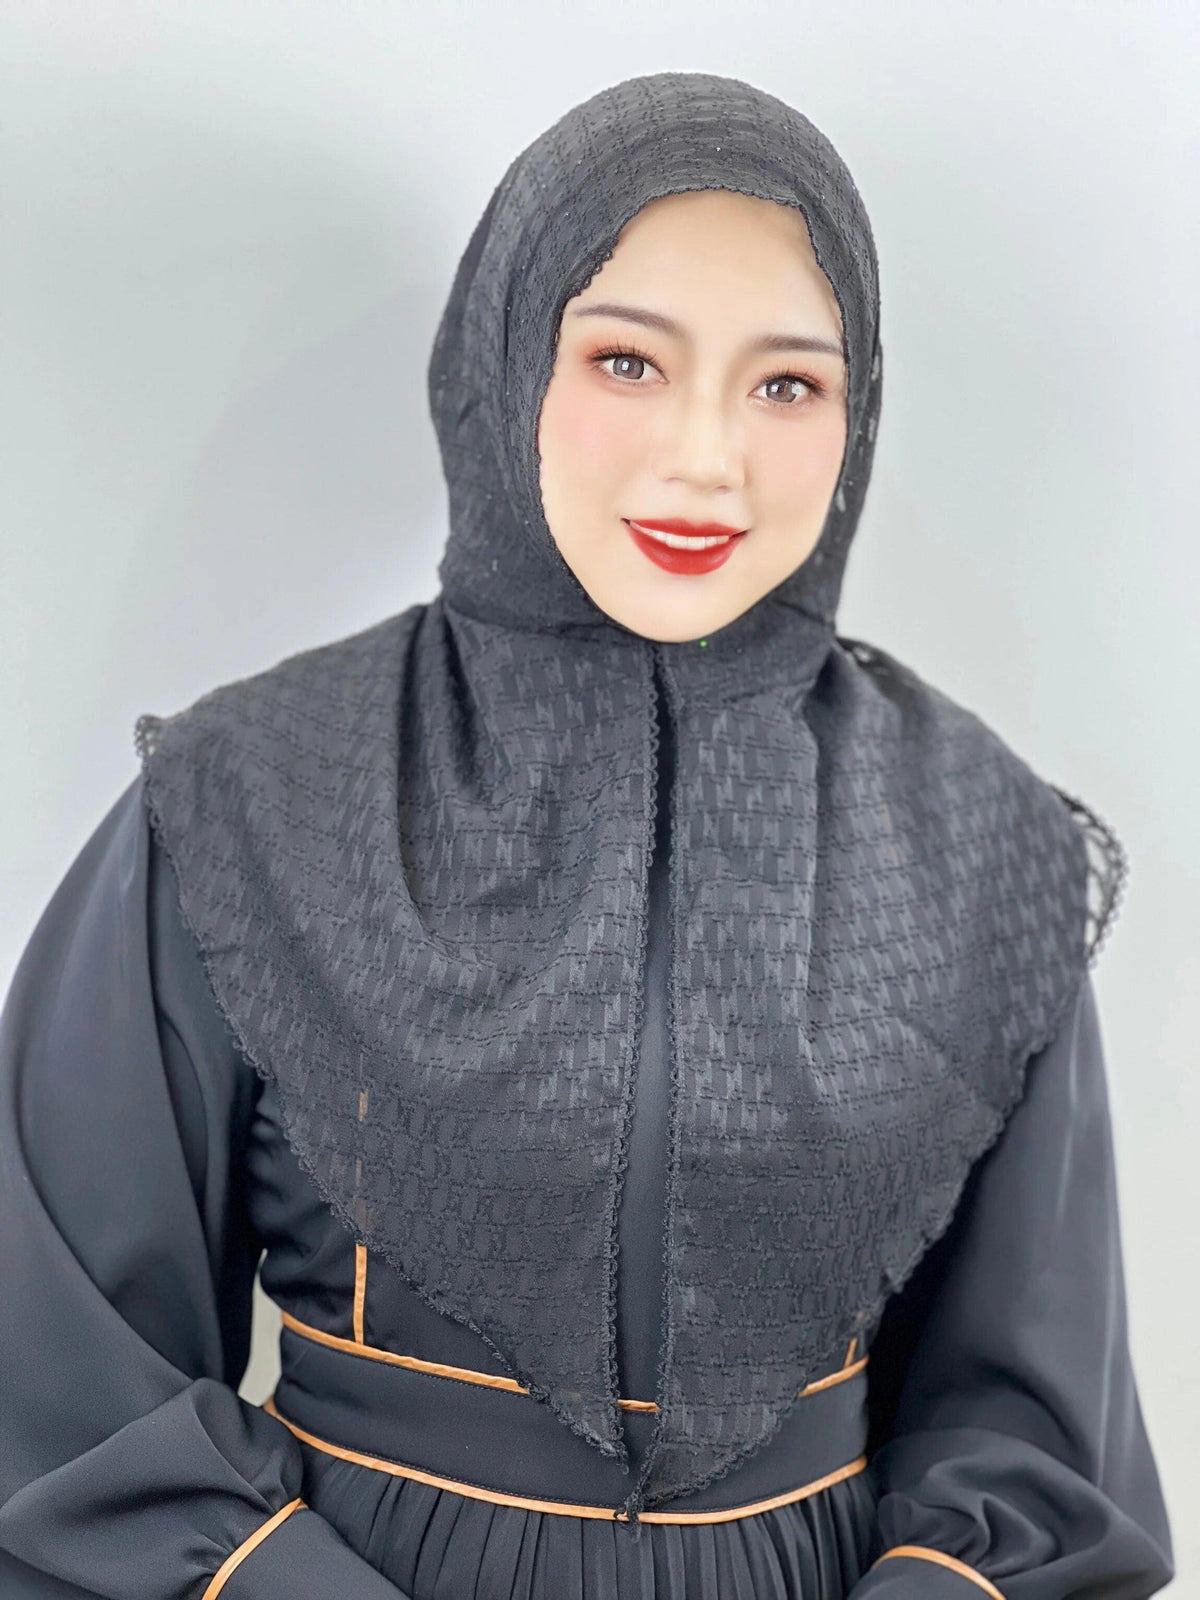 On sale - Breathable Mesh Hijab - 9 Colours - Free shipping